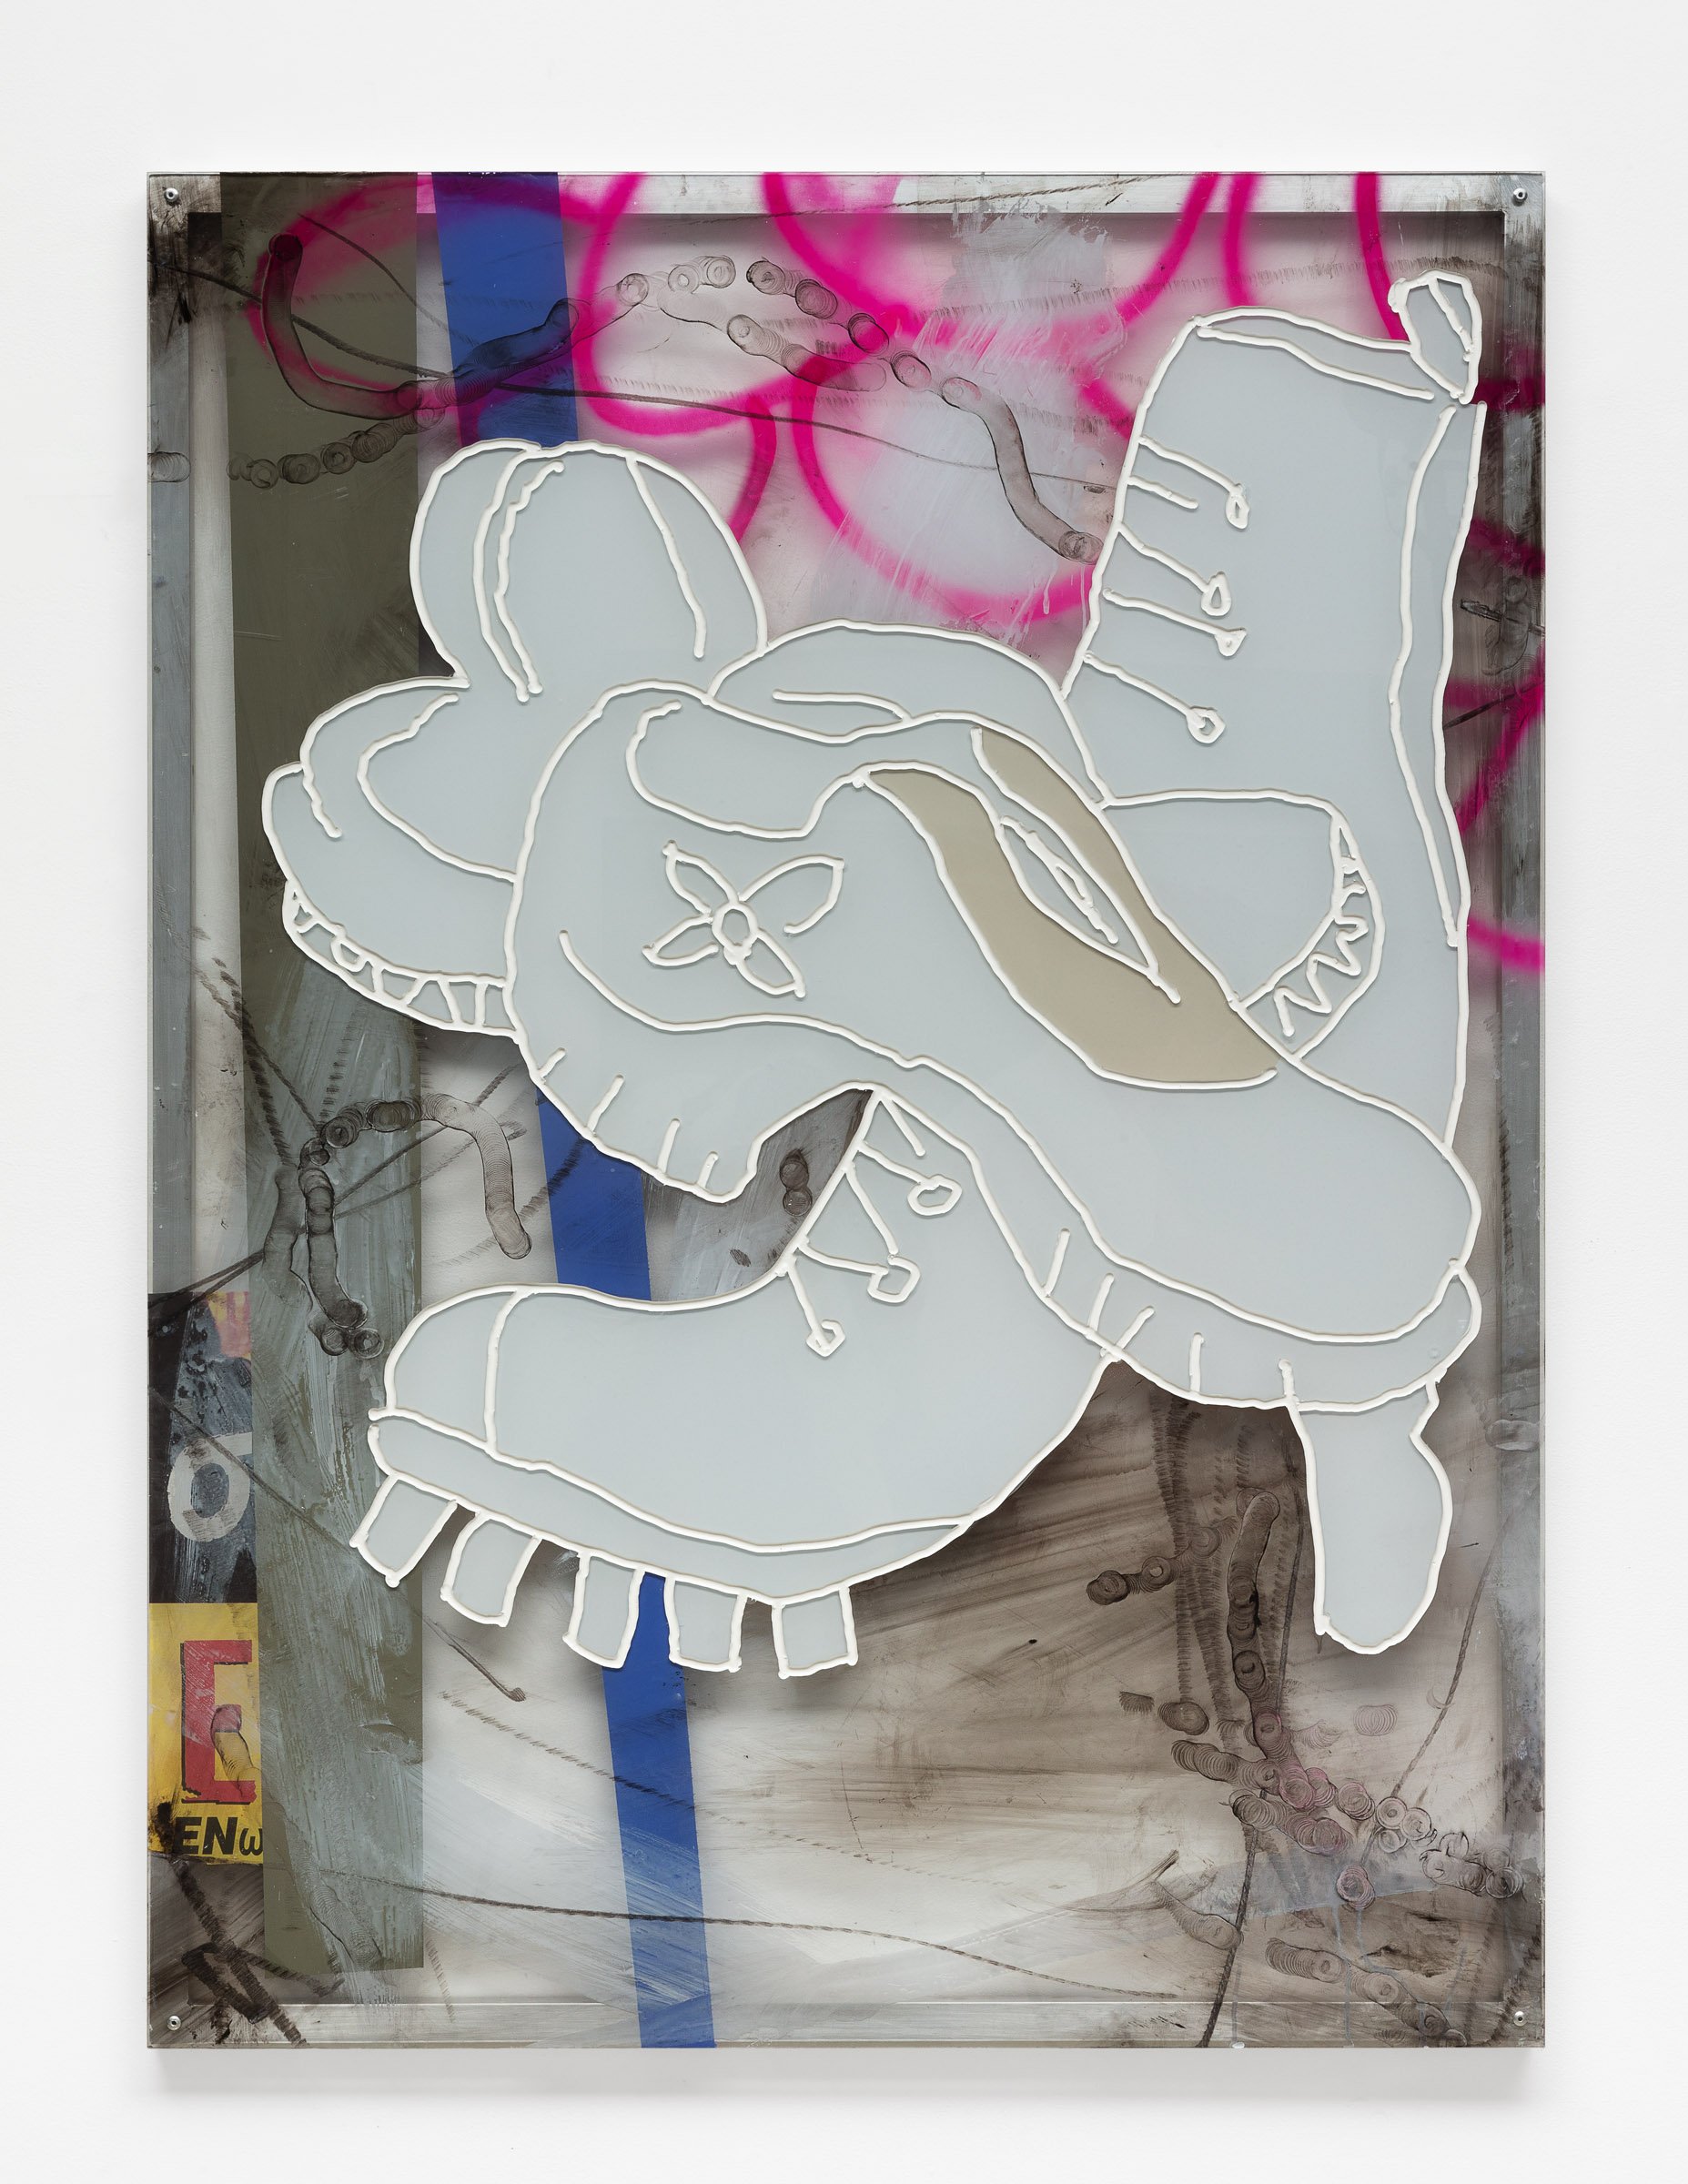  Joe Fleming, Shoes, 2023, enamel and collage on polycarbonate, 48” x 36” 